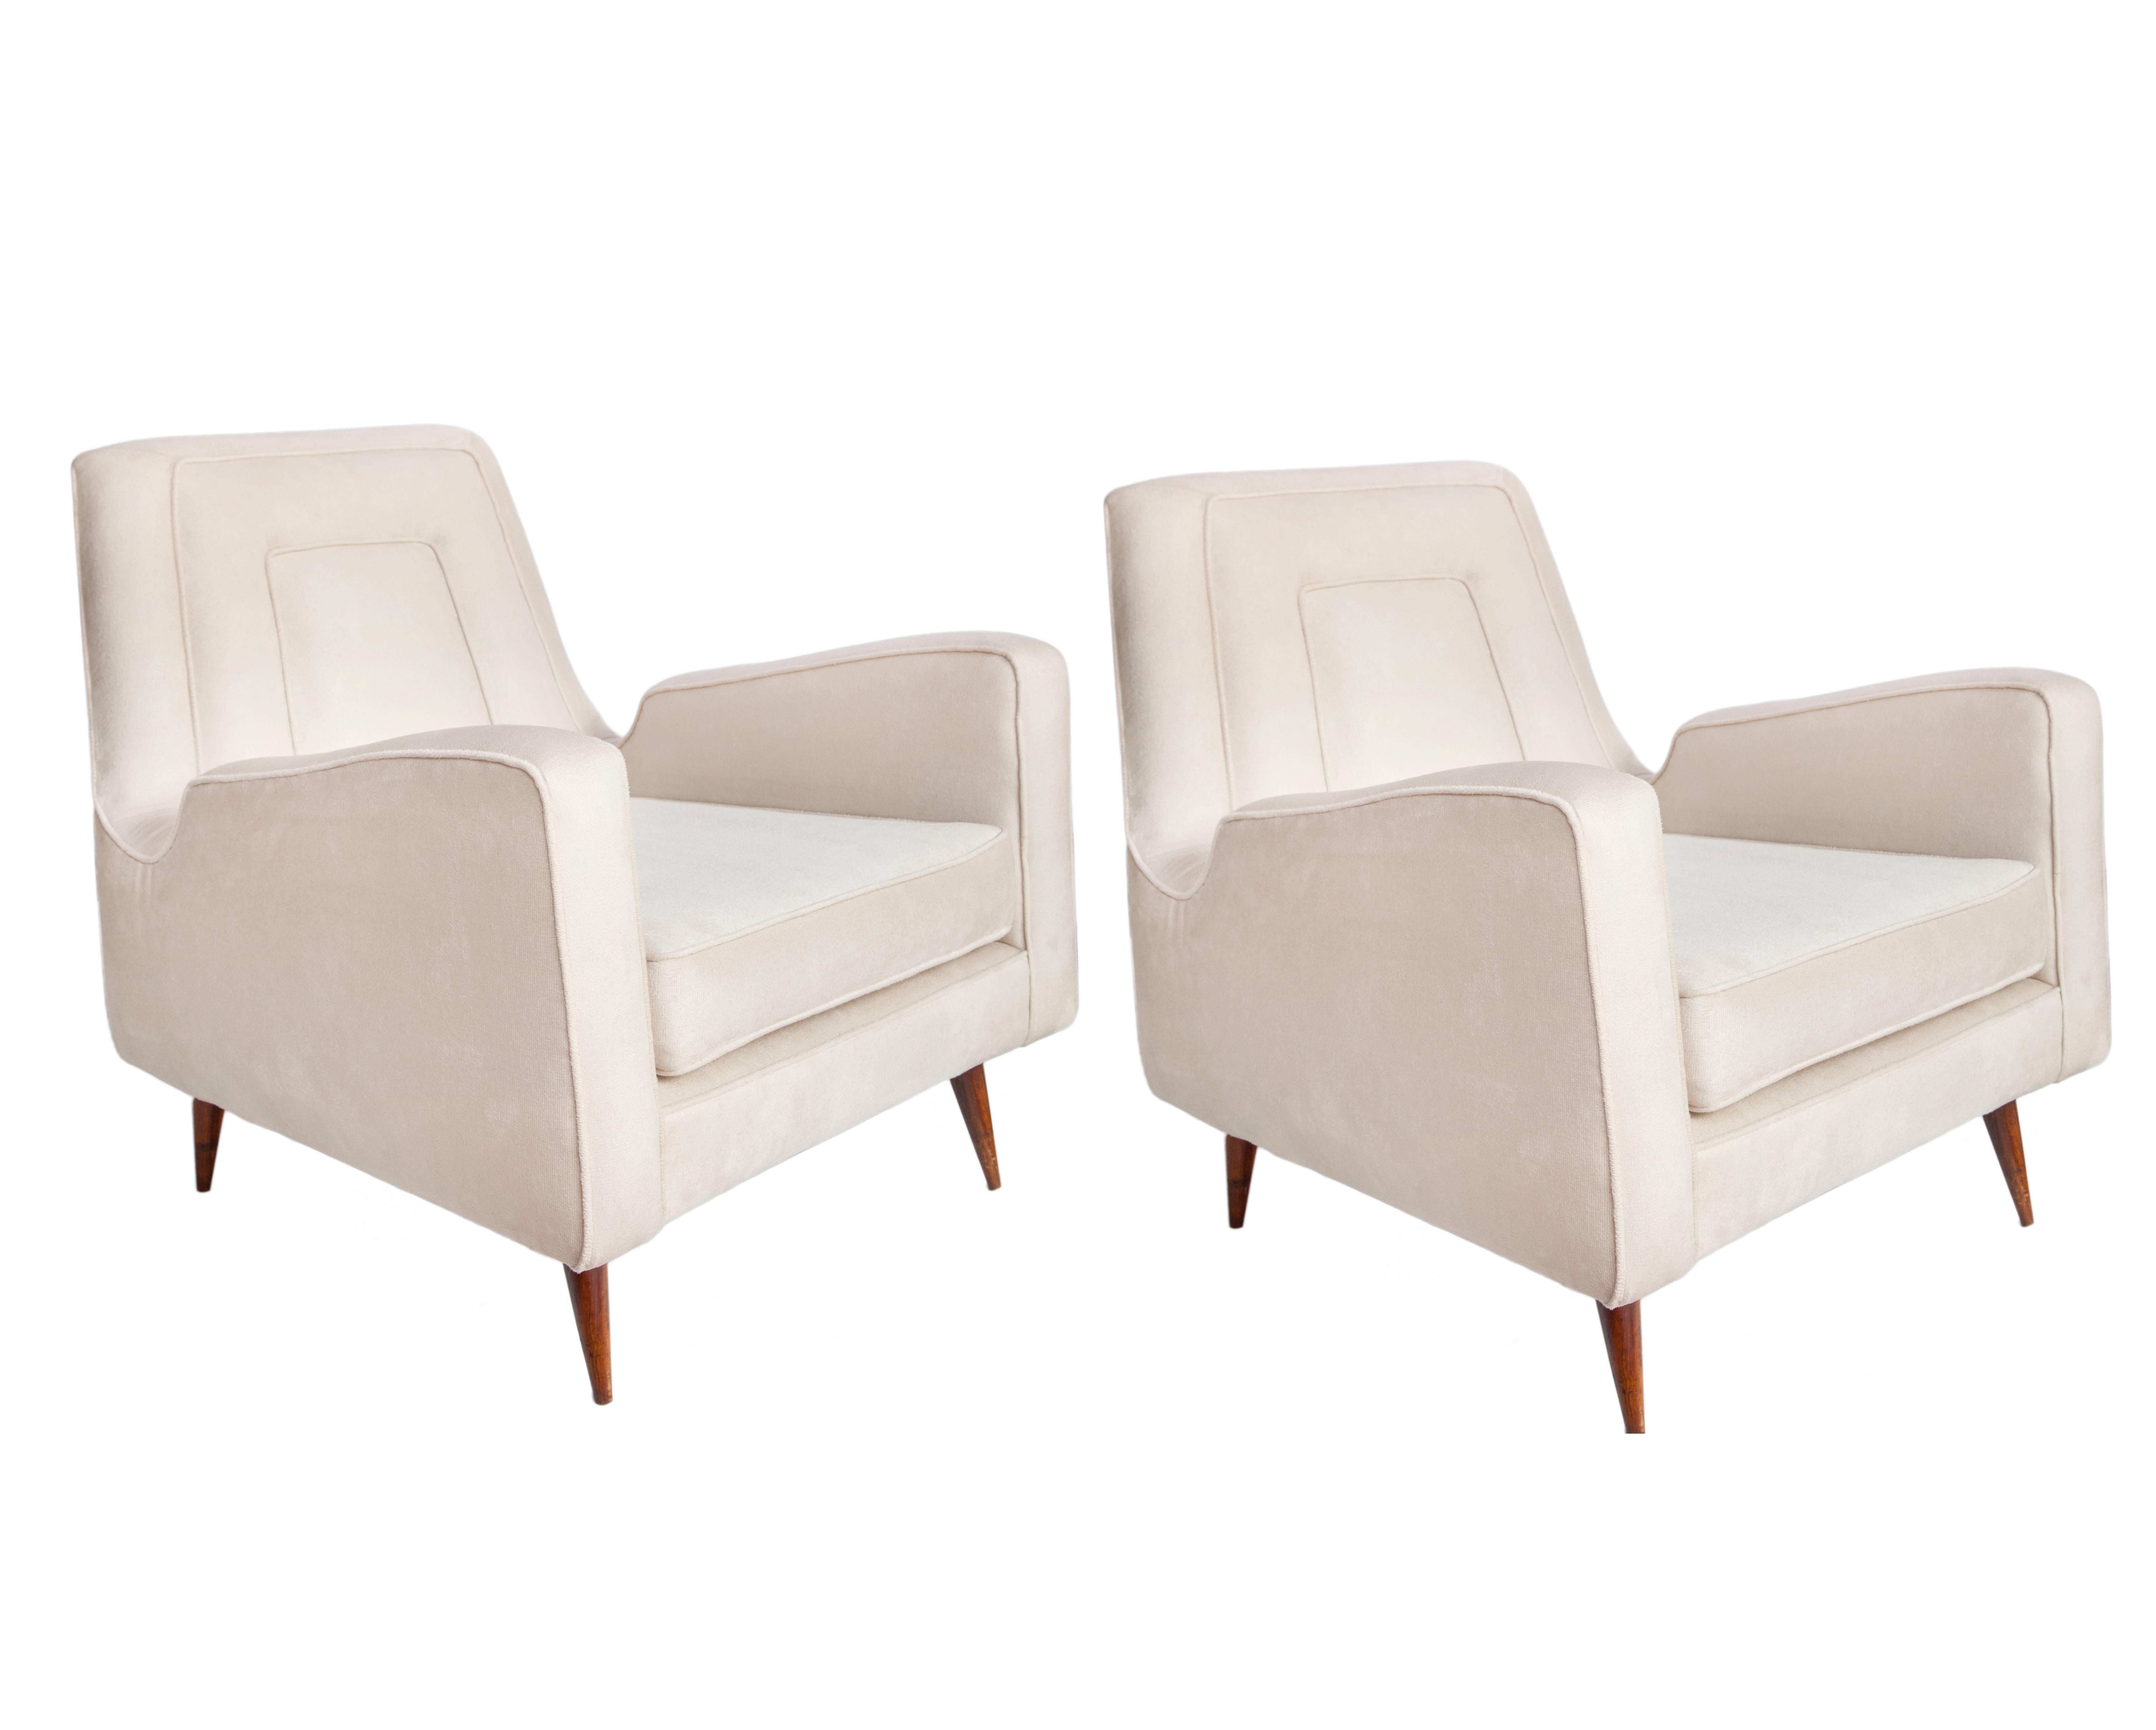 Brazilian Mid-Century Modern armchairs dating from the 1950s in caviuna wood. Each has been recently reupholstered in beige artificial suede. These chairs are in good vintage condition and have wear consistent with age and use.